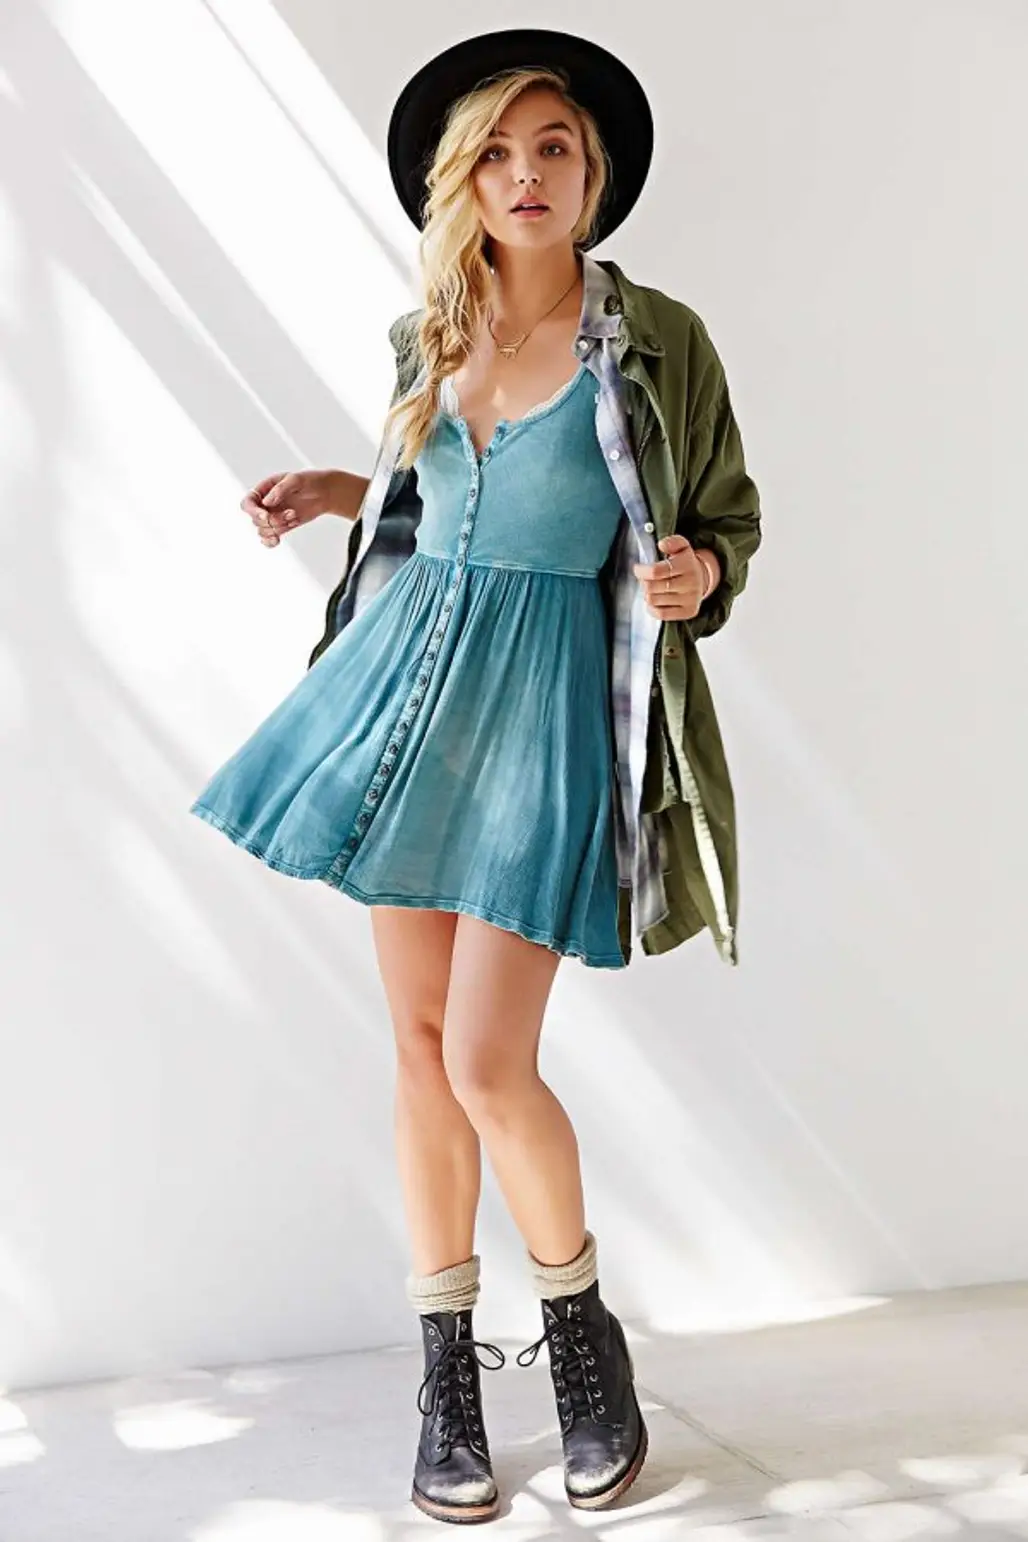 Denim Dresses Are One of the Hottest Trends This Season. Don't Be Afraid to Rock Them!